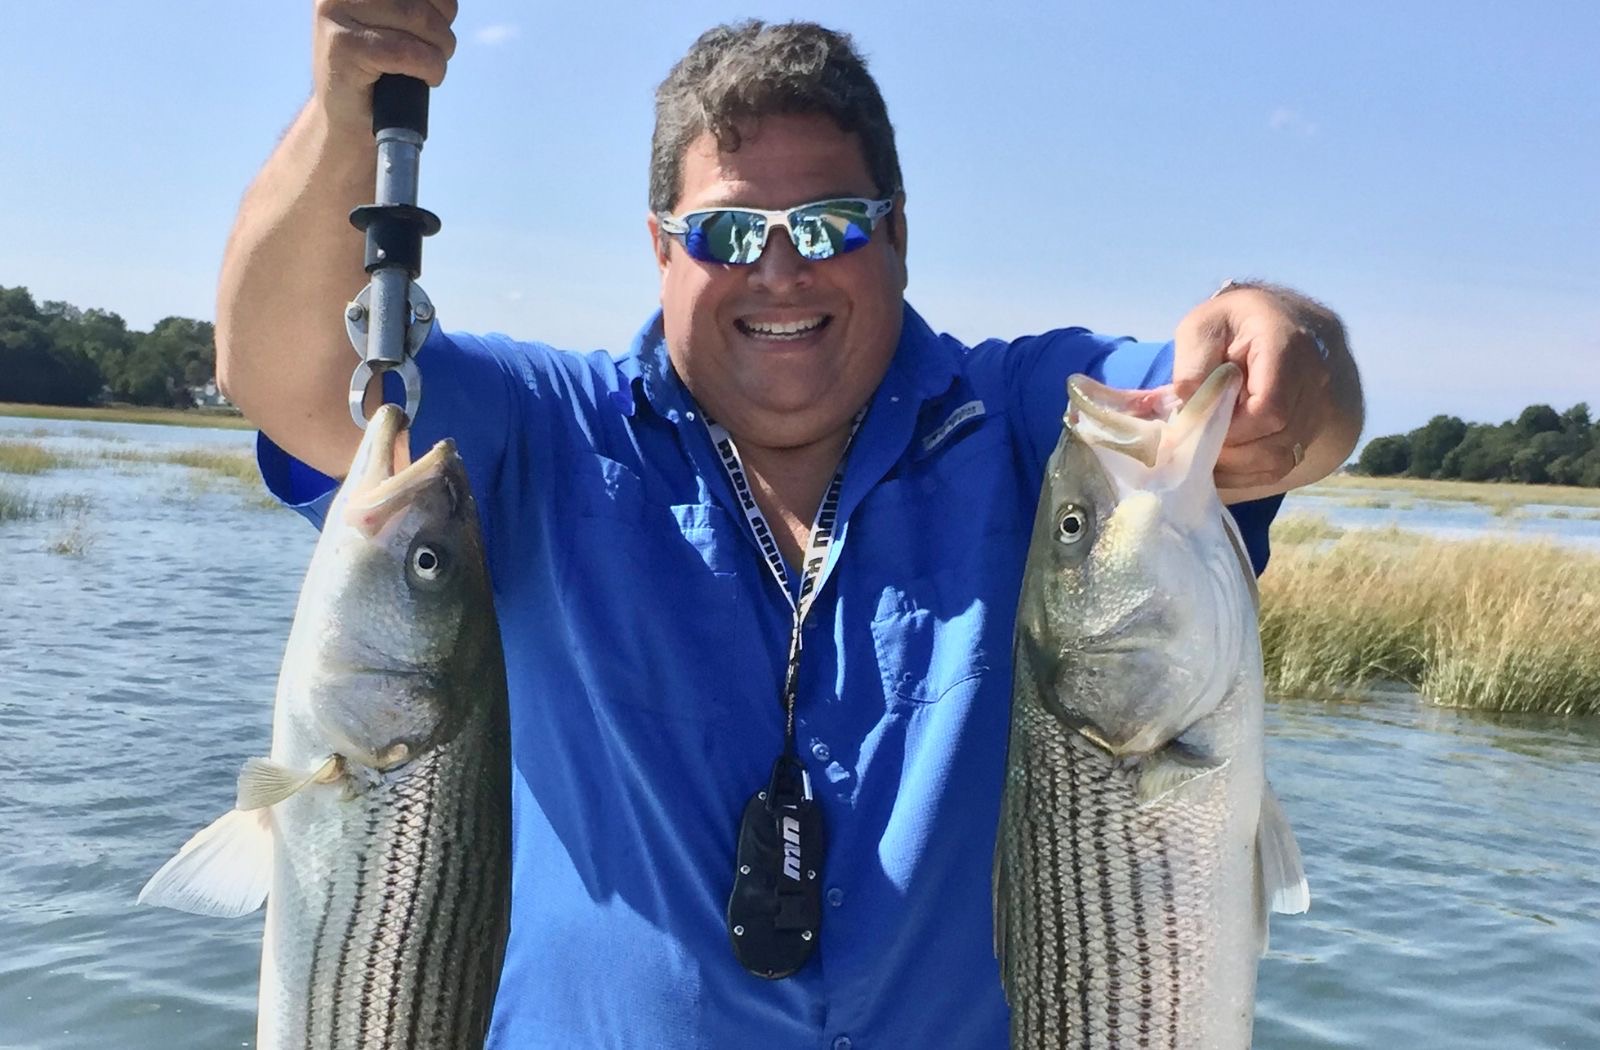 Fisherman with mirrored sunglasses and a blue Columbia fishing shirt holds two Striped Bass one by the lip and the other by the lip using a Boga grip fish grabber with a tidal river background